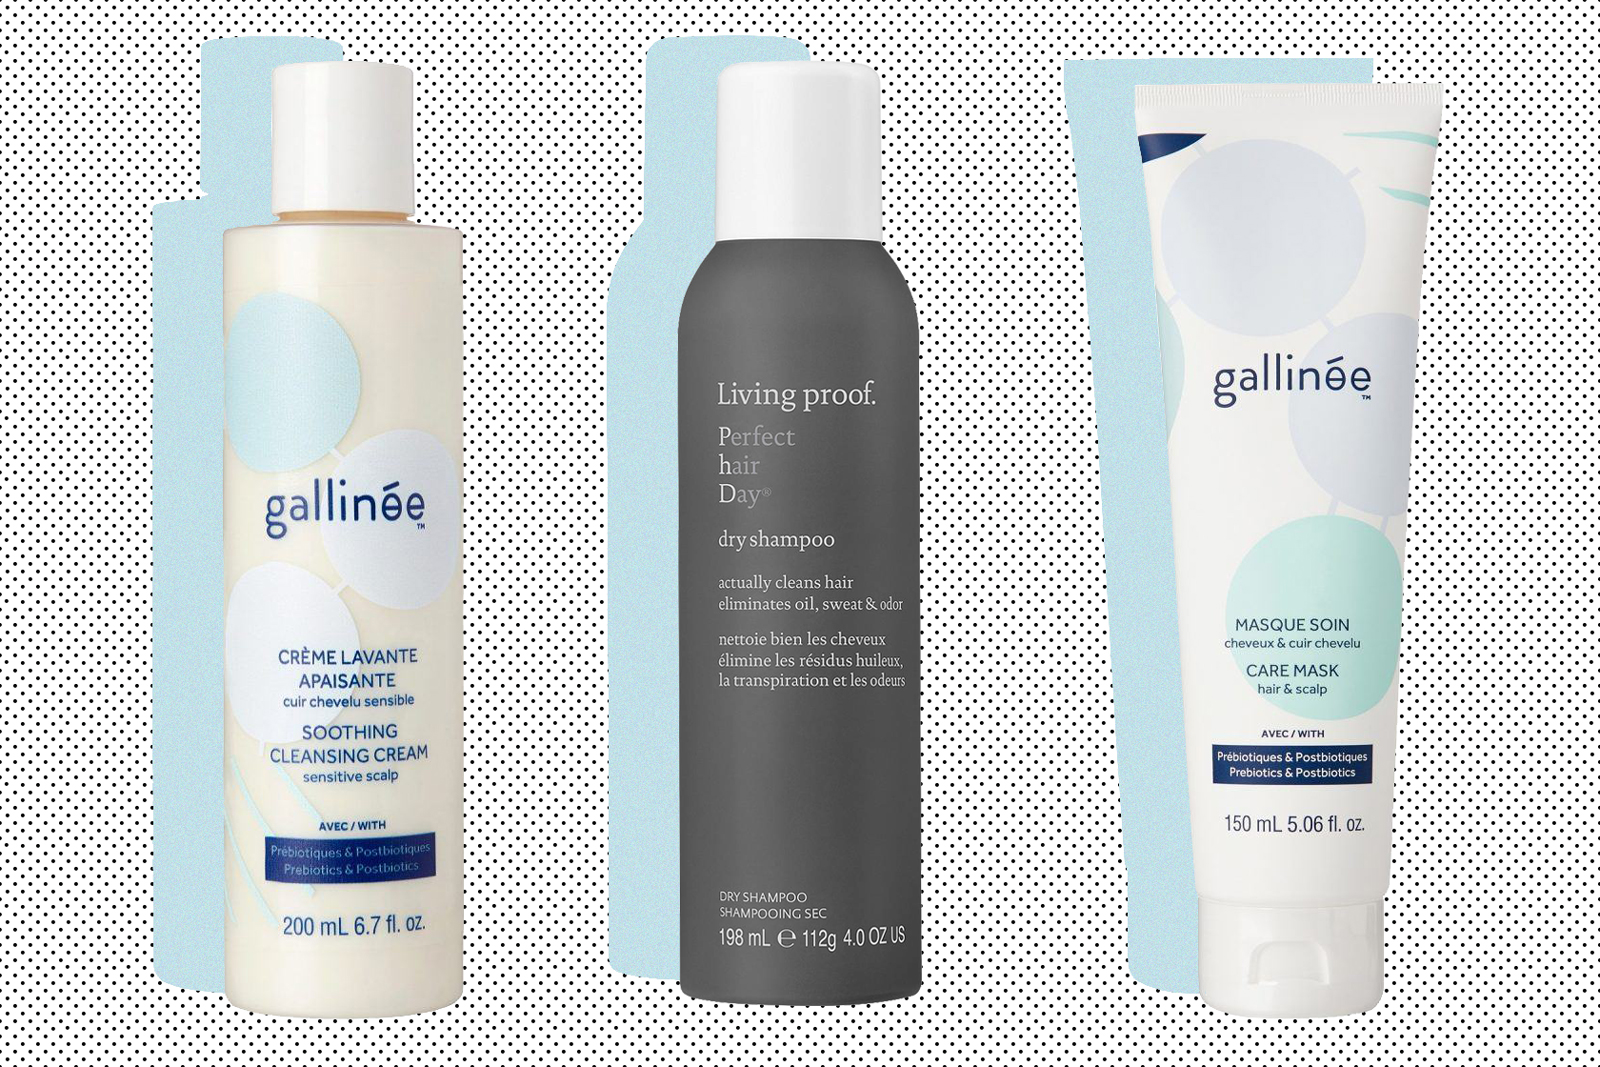 washing your everyday with Gallinée products